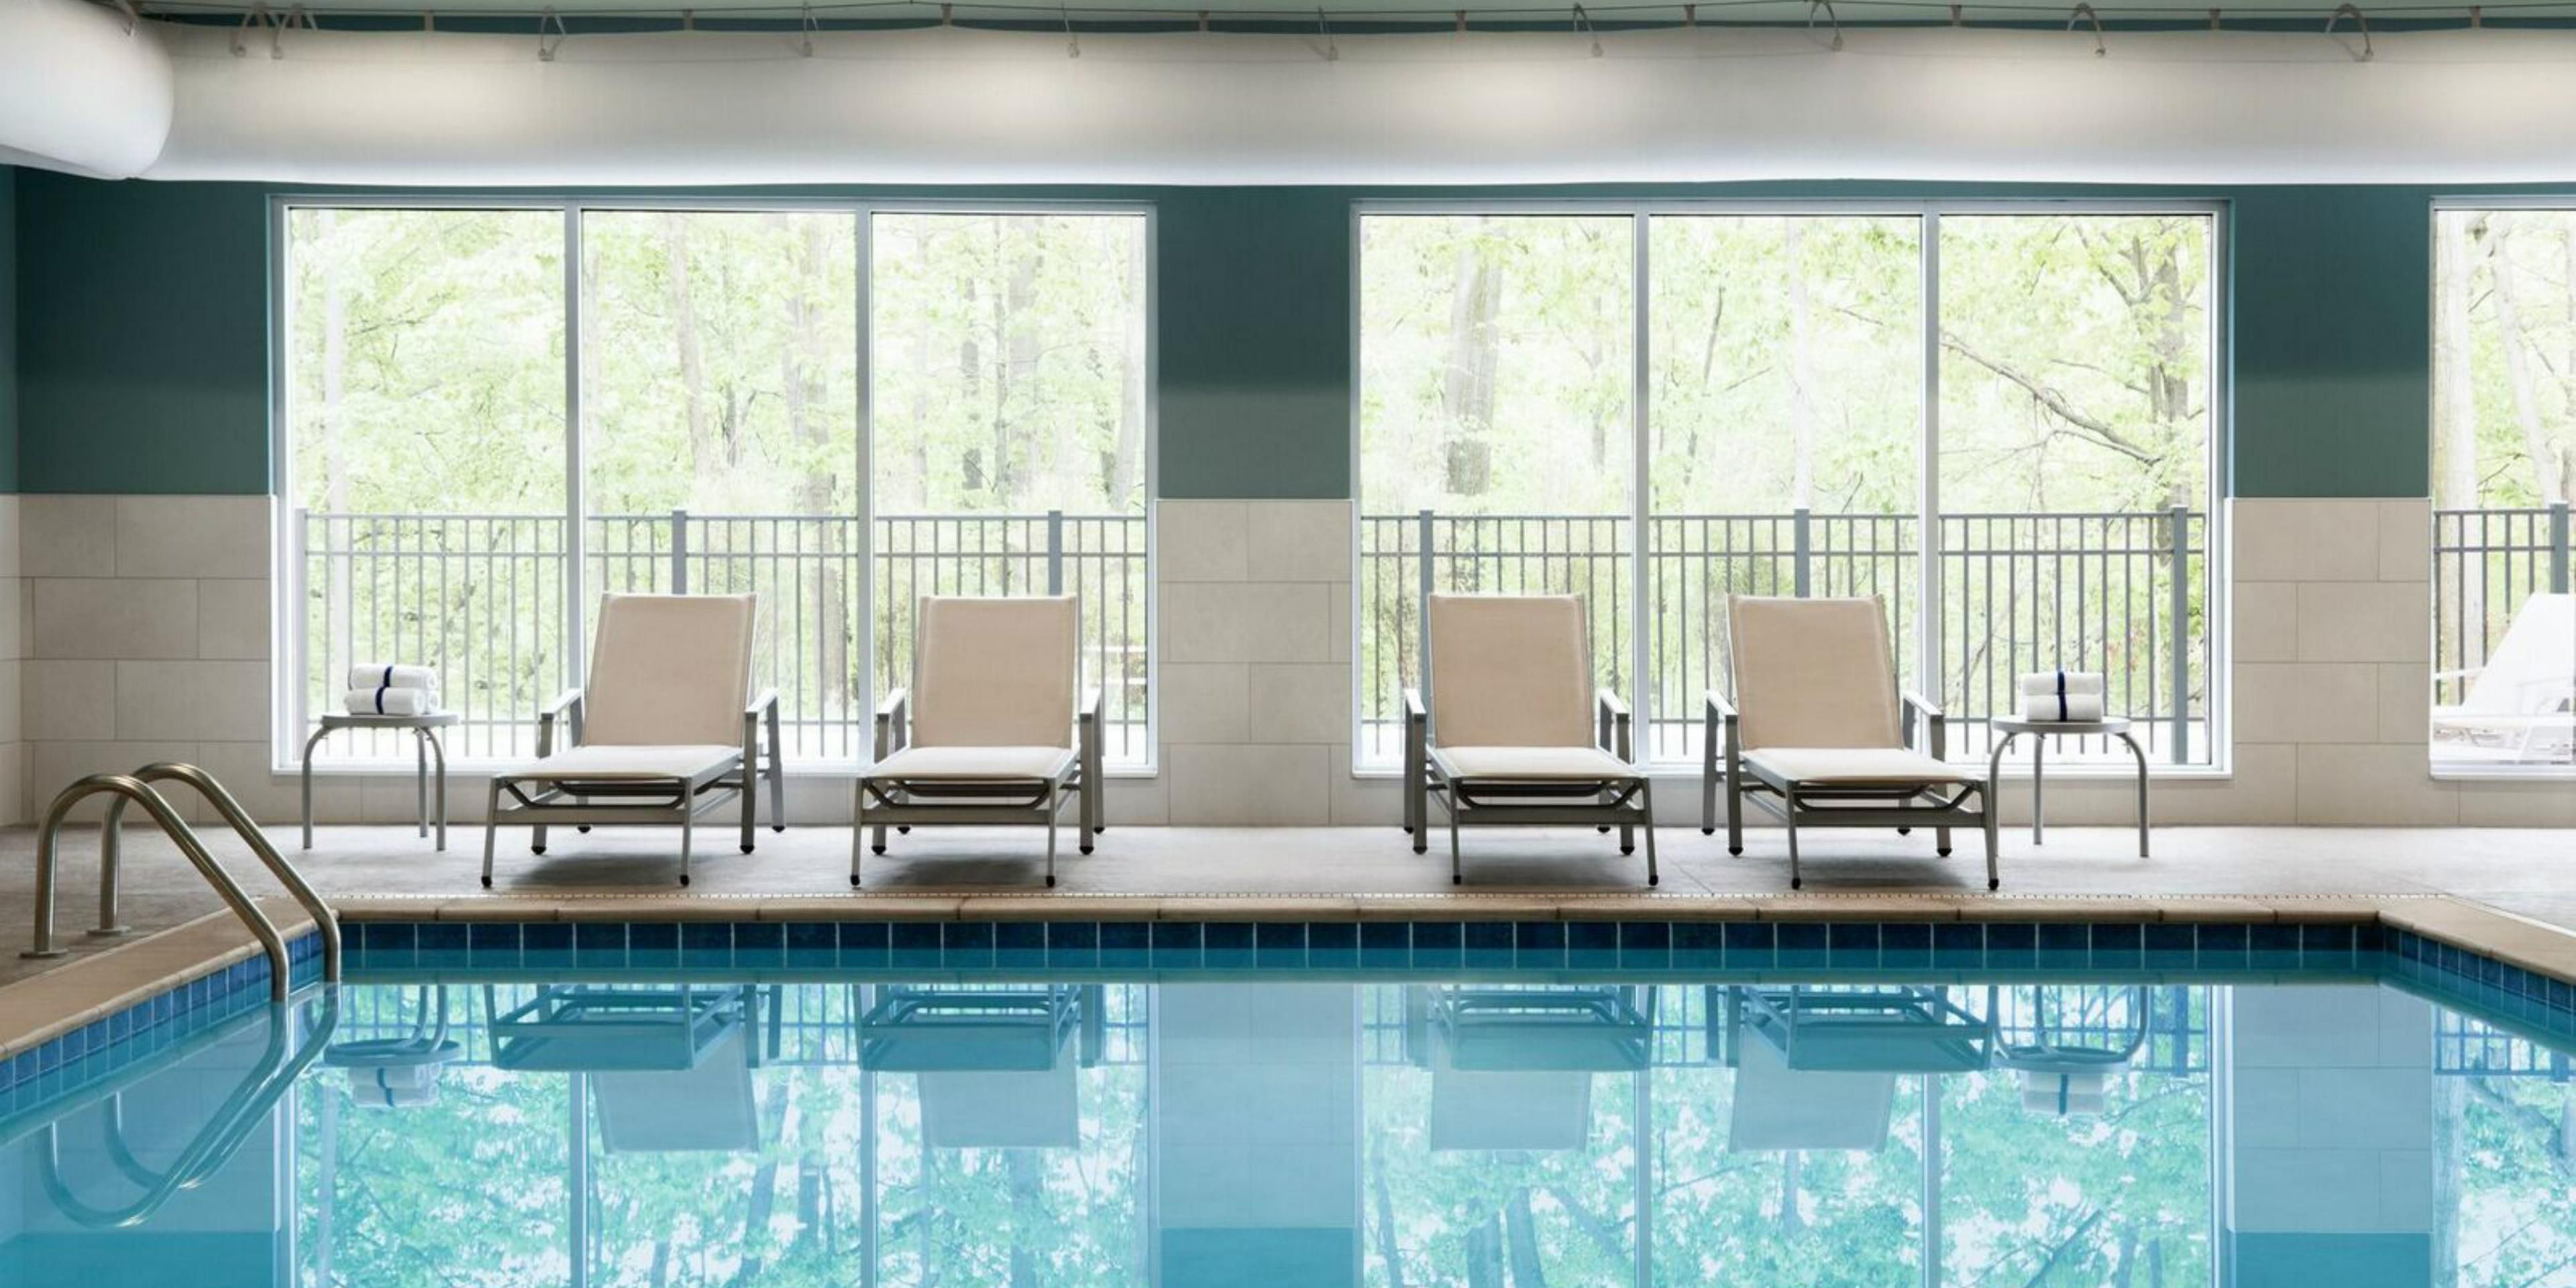 No matter the temp outside, you can enjoy our indoor pool all year round! Pool open 7am-11pm